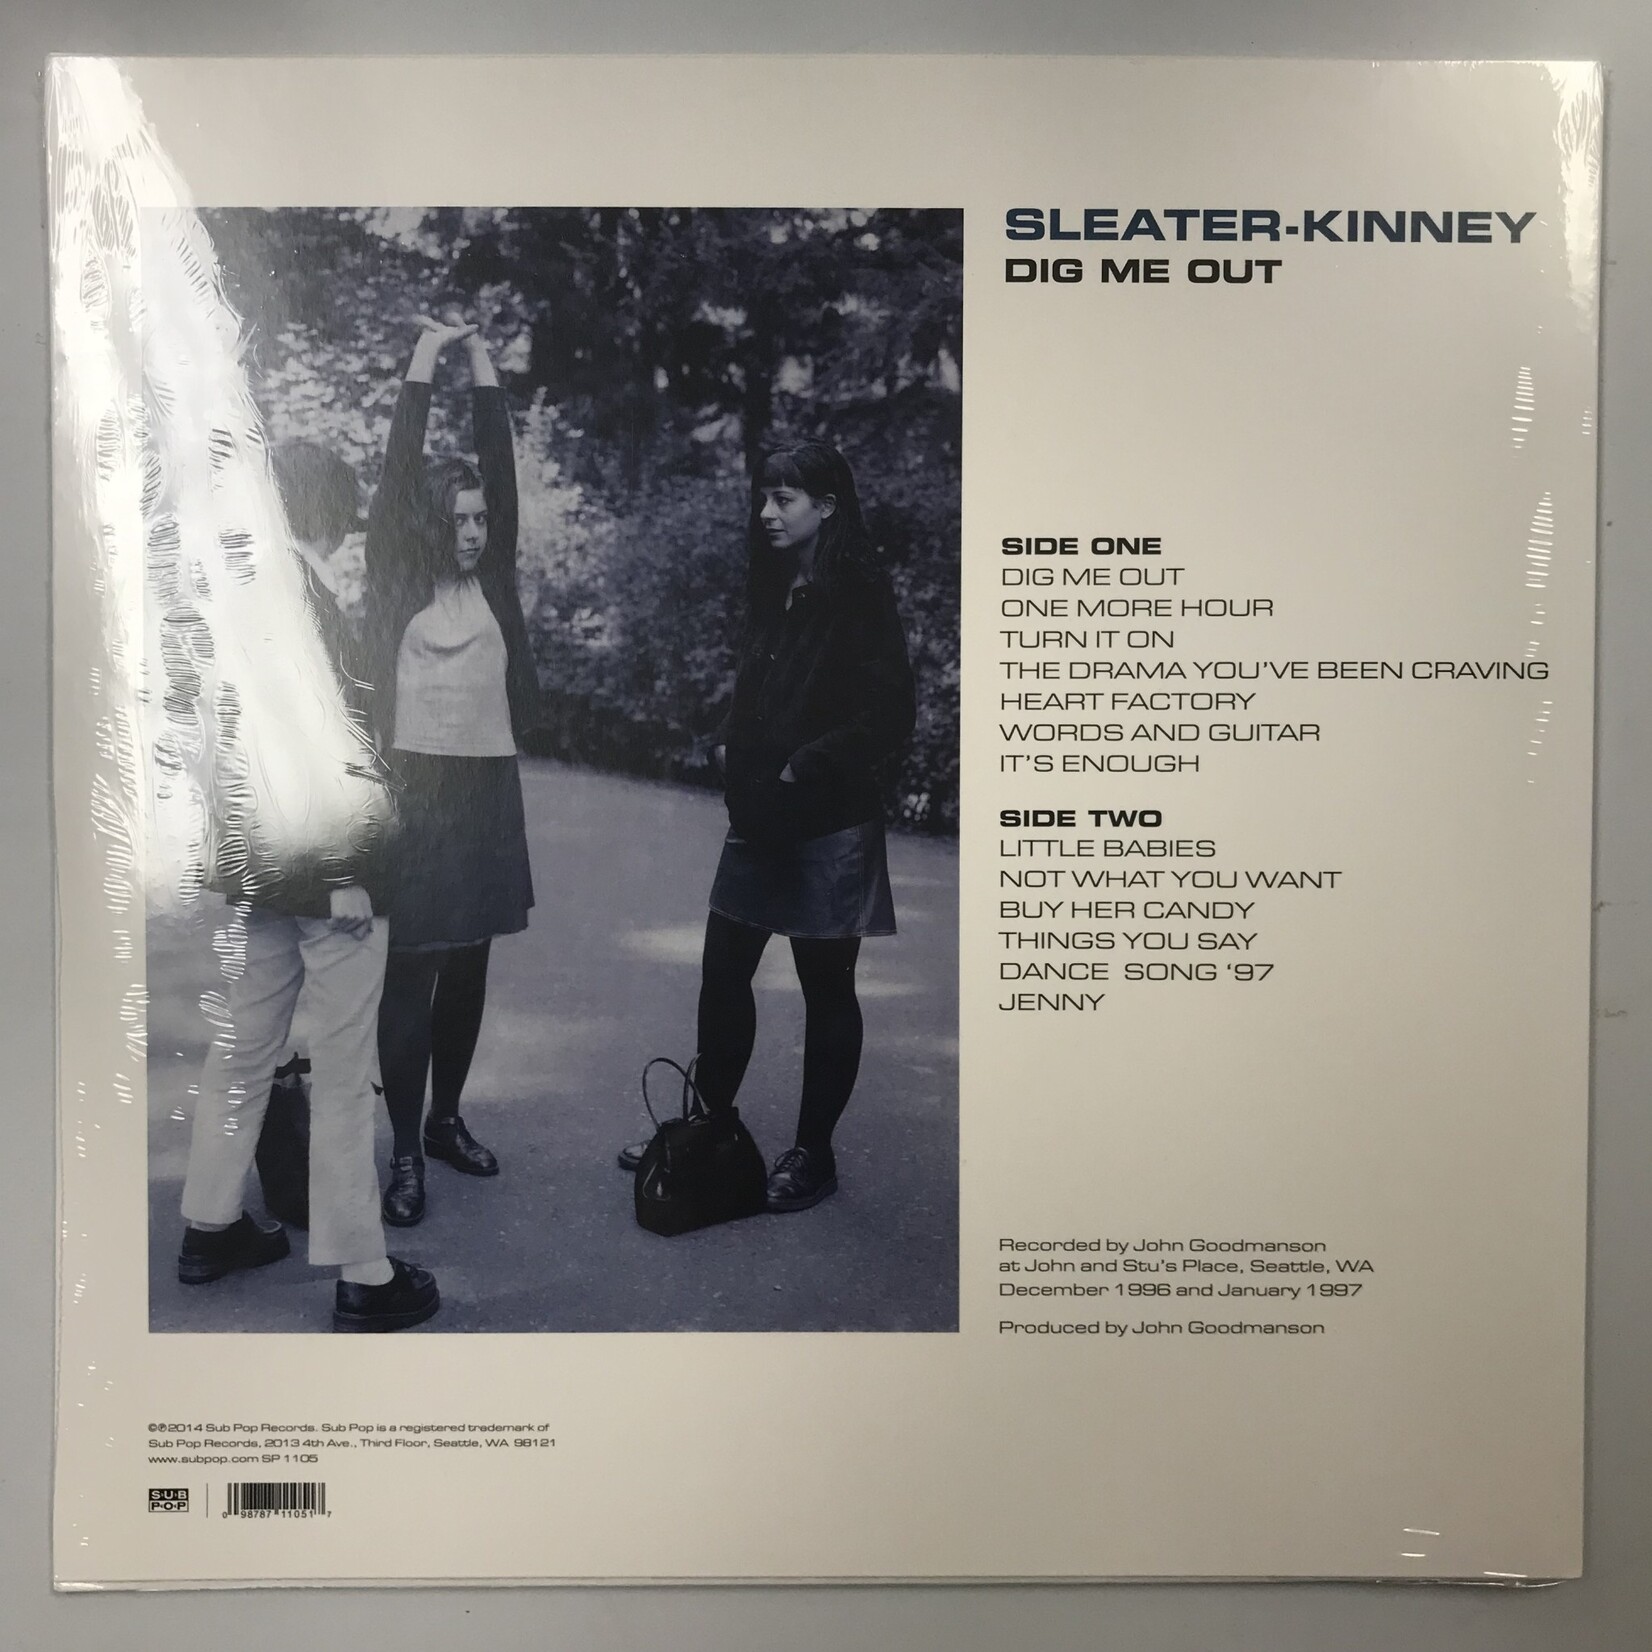 Sleater-Kinney - Dig Me Out - SUB71105 - Vinyl LP (NEW)